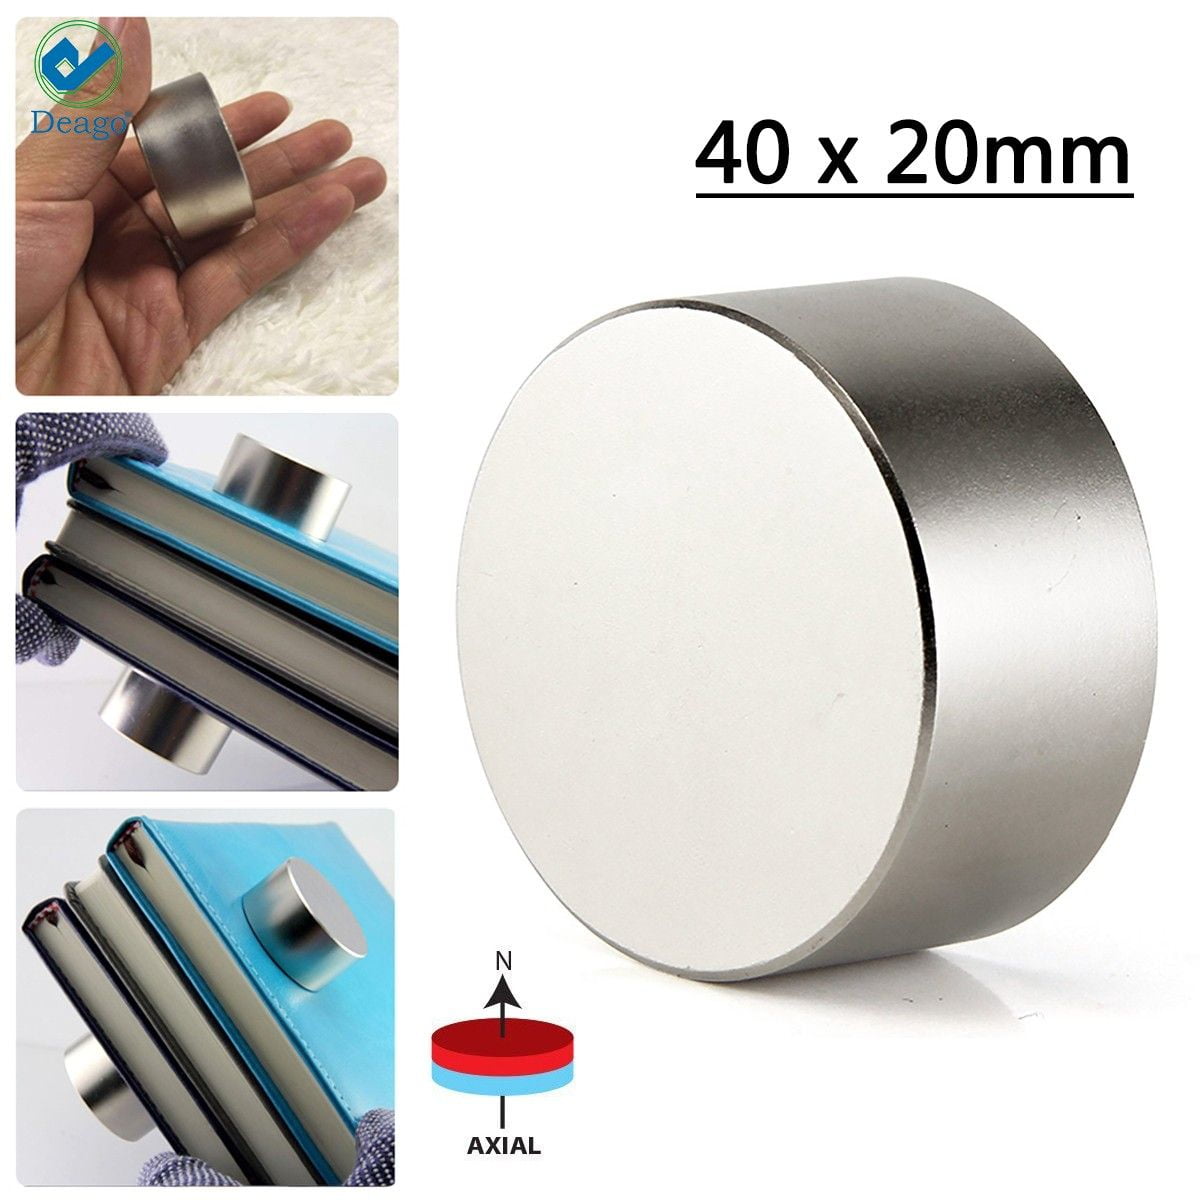 Rare Earth Magnet 8mm x 2mm Strong Neodymium N35 NdFeB Strong Round Craft Magnet 